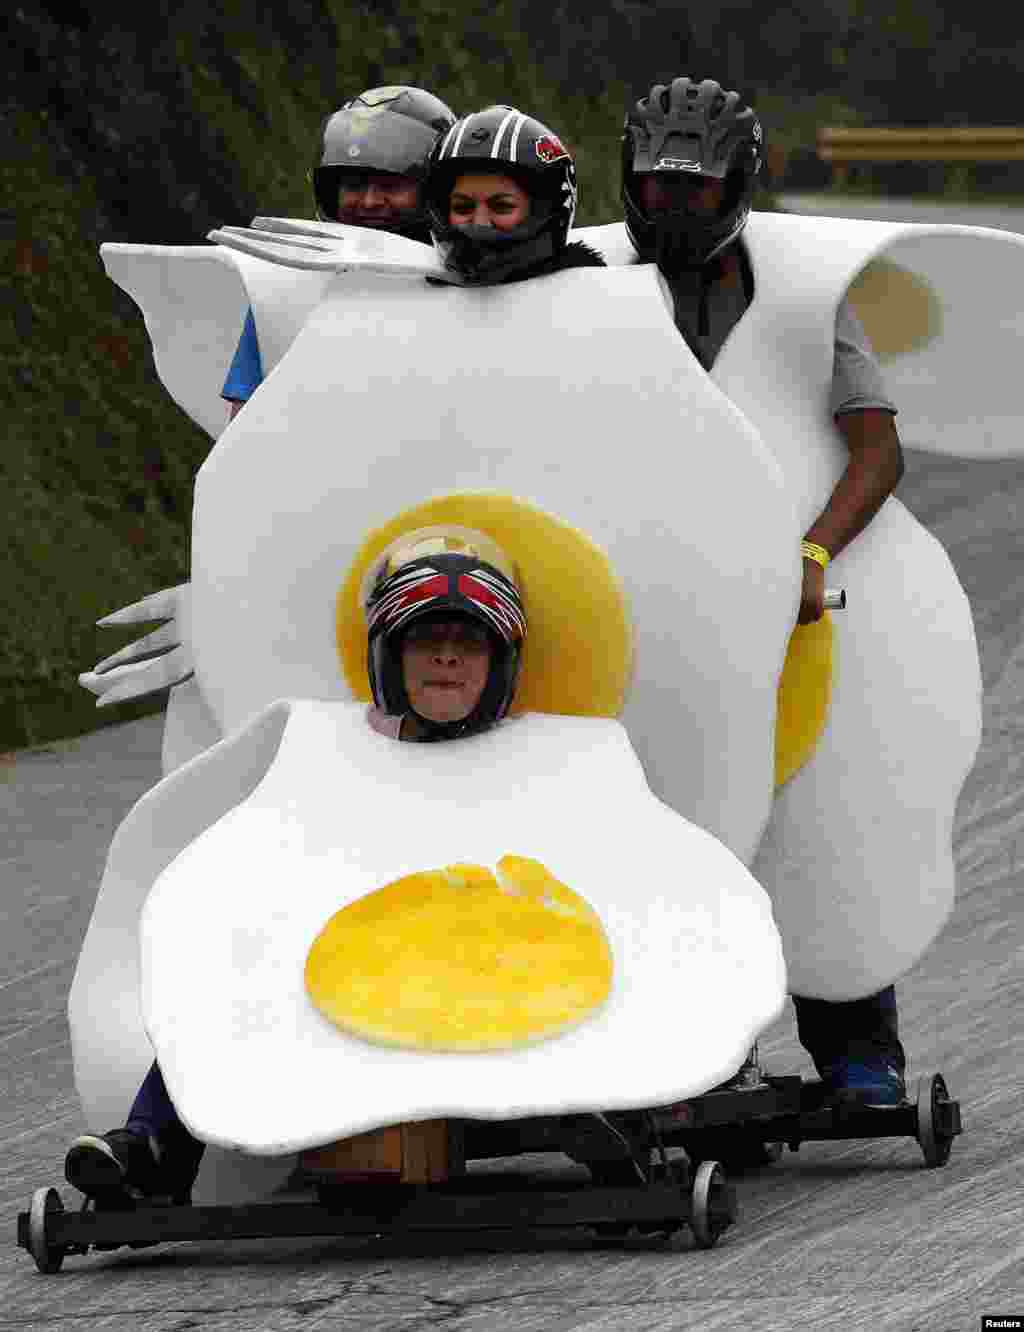 Participants wearing fried egg costumes descend down a hill in a homemade roller cart for the 24th Rollercoaster Cart Festival of Medellin, Colombia, Oct. 27, 2013. 